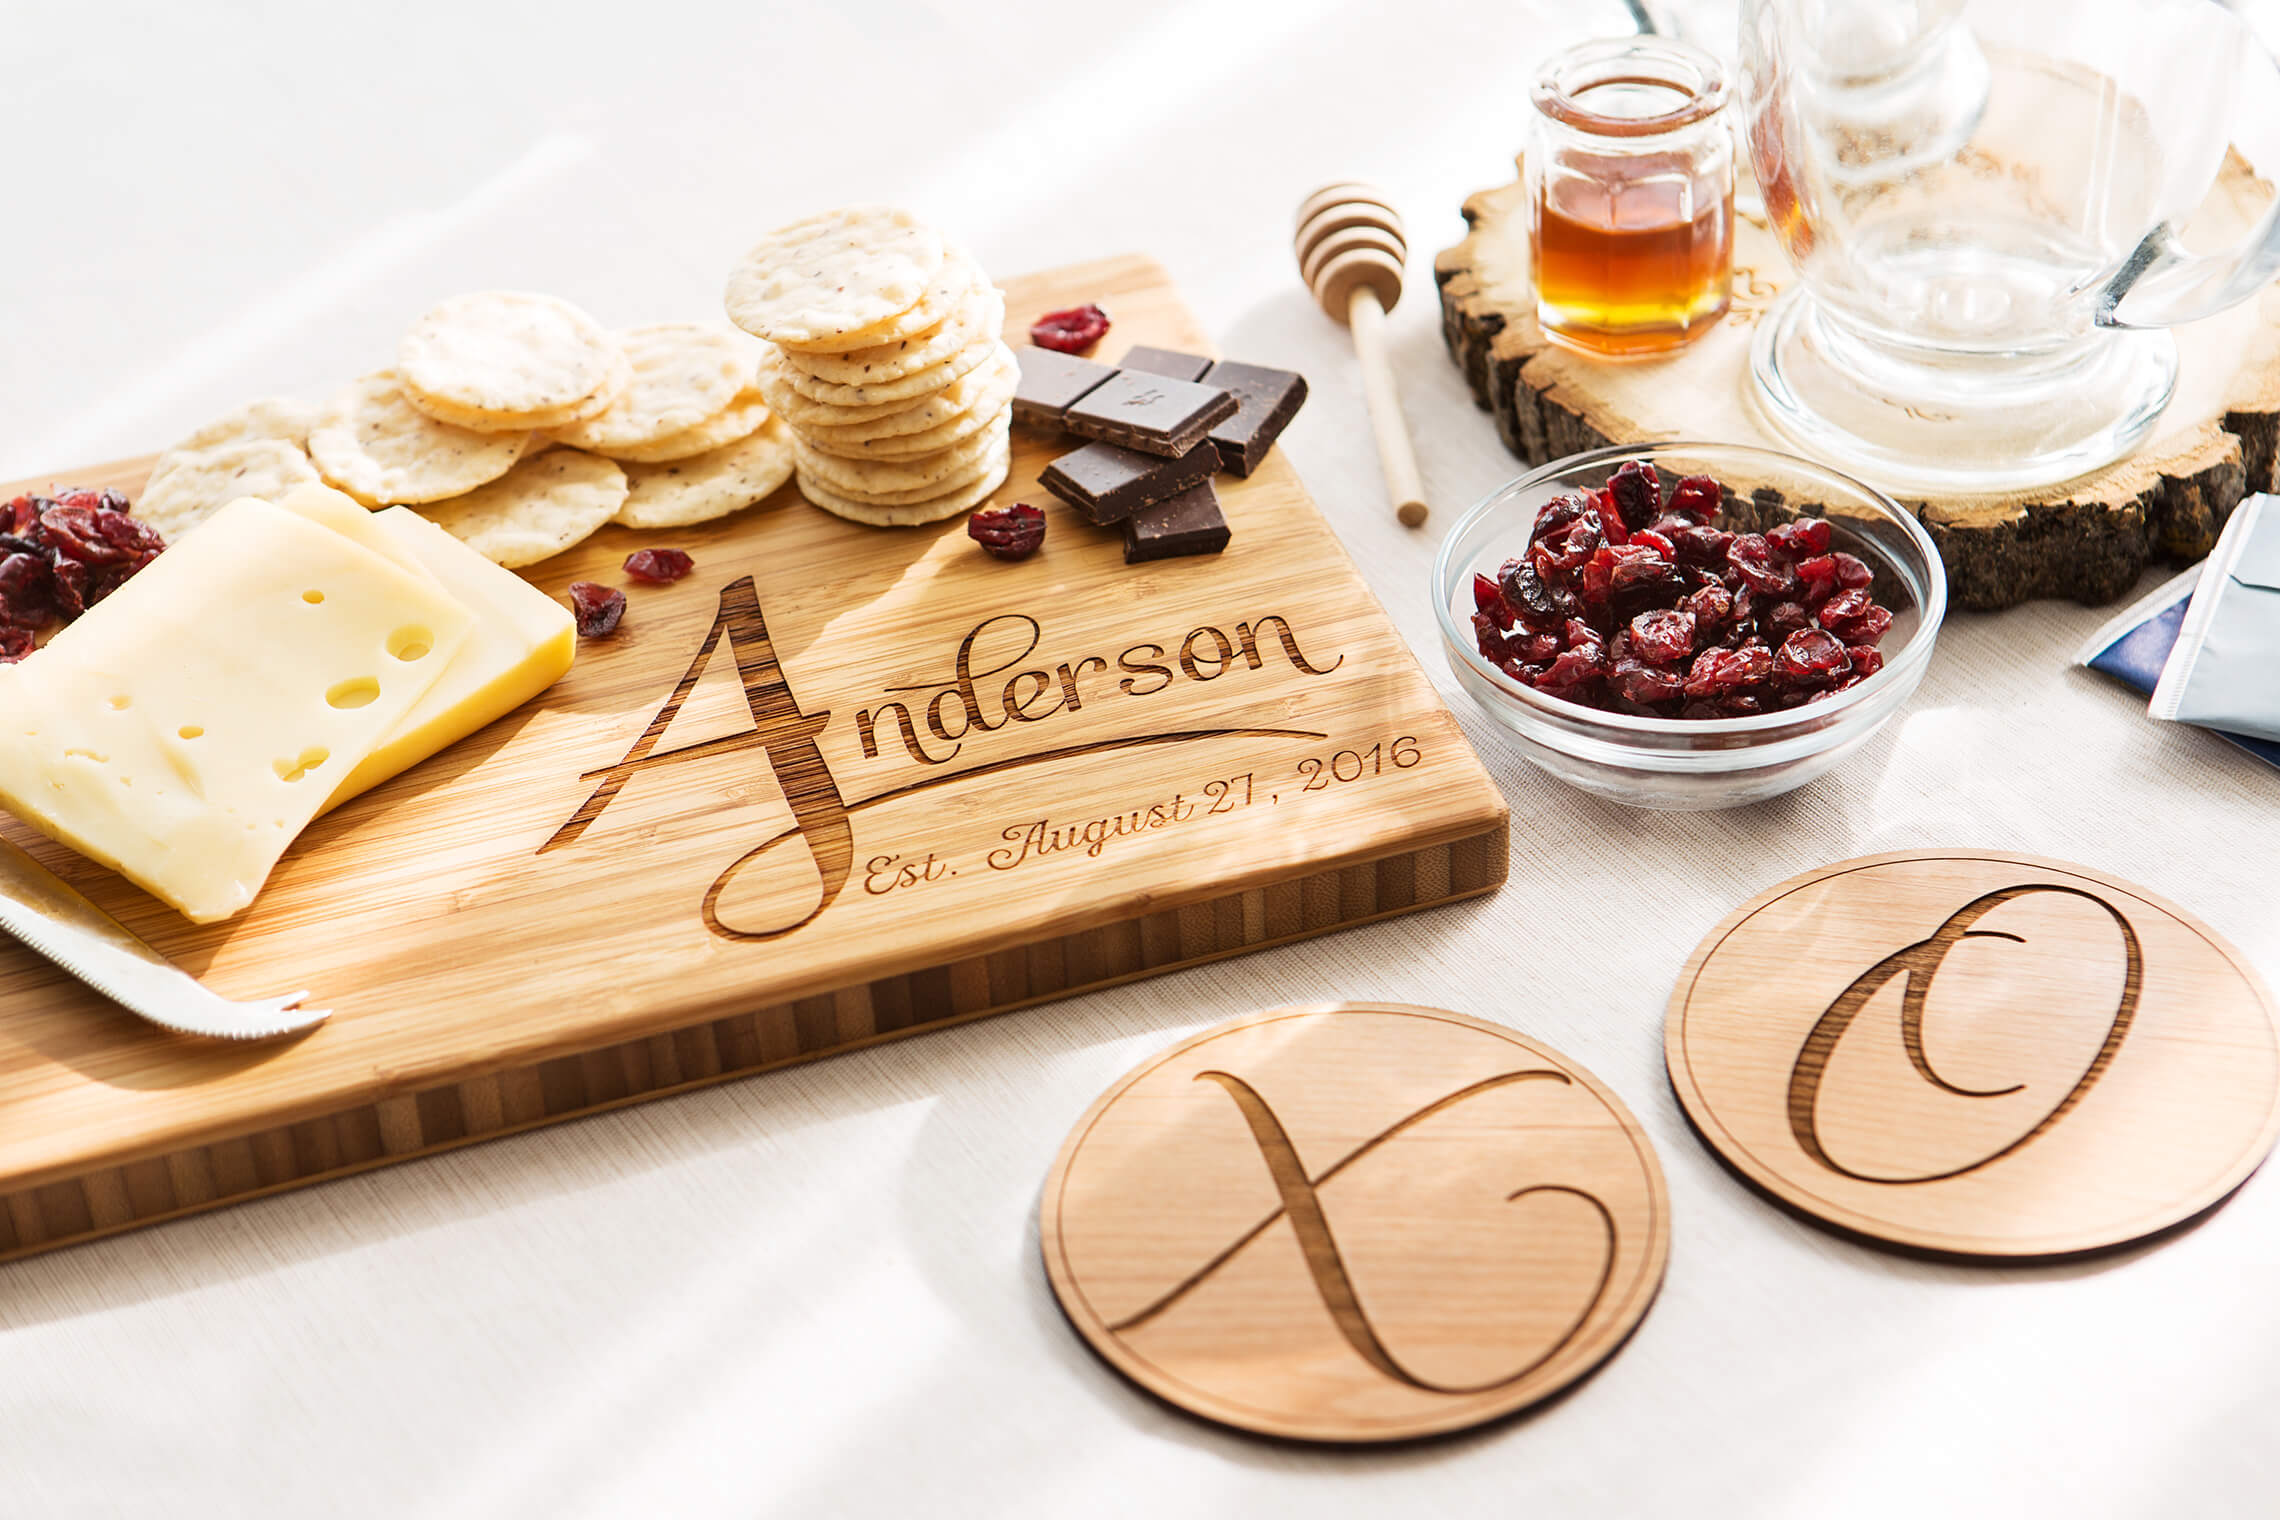 Cheese board and coasters